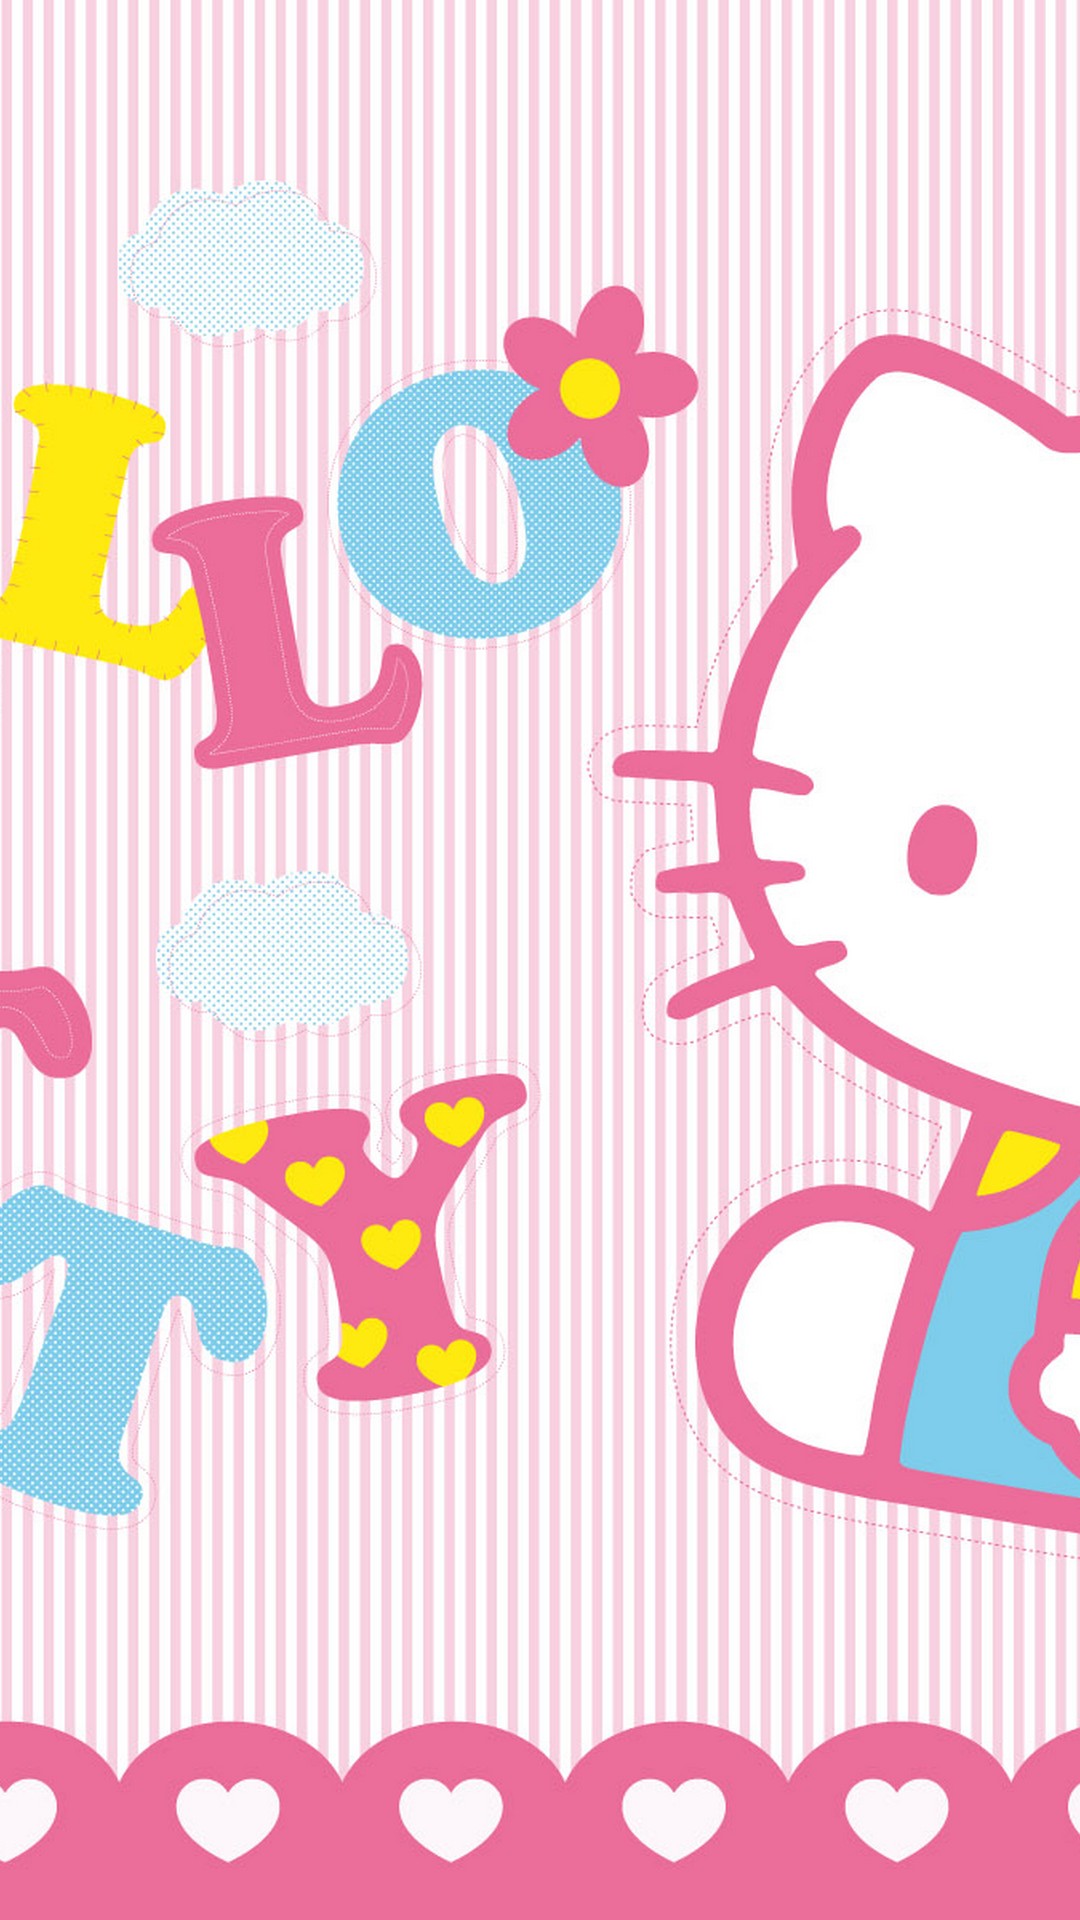 Sanrio Hello Kitty Wallpaper iPhone HD with resolution 1080X1920 pixel. You can use this wallpaper as background for your desktop Computer Screensavers, Android or iPhone smartphones